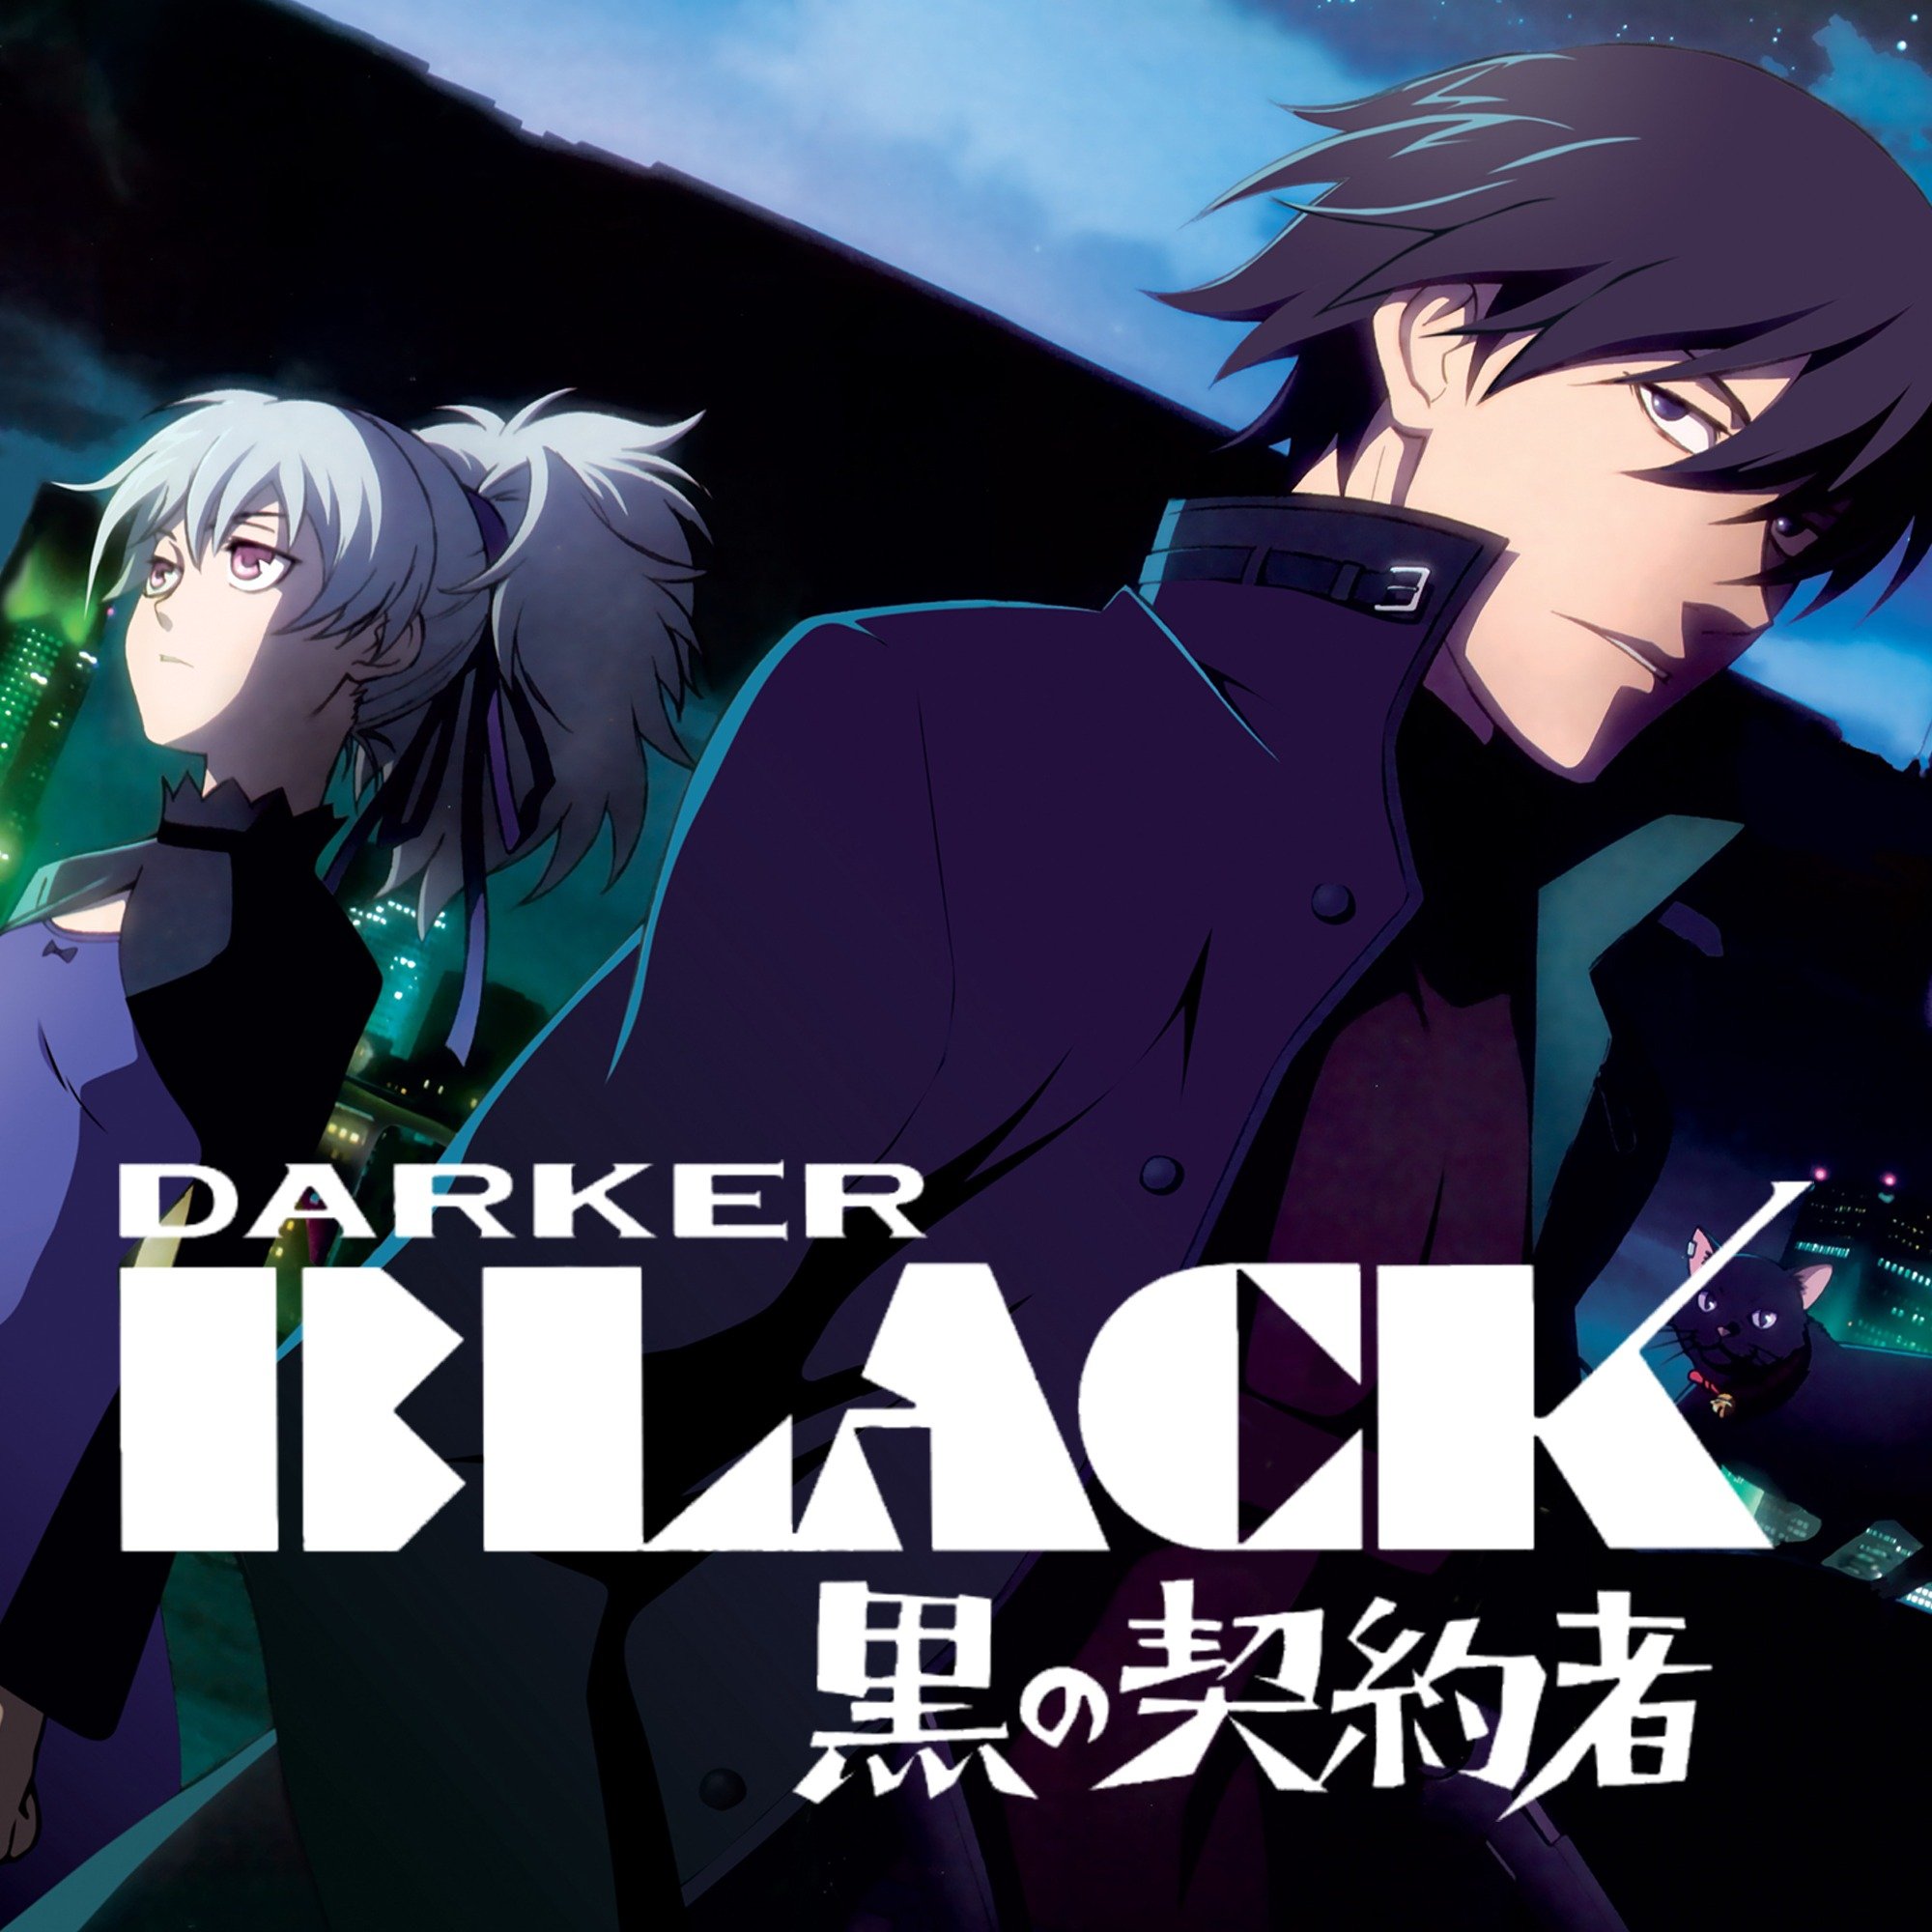 The 20+ Best Anime Similar To Black Cat, Recommended by Otaku